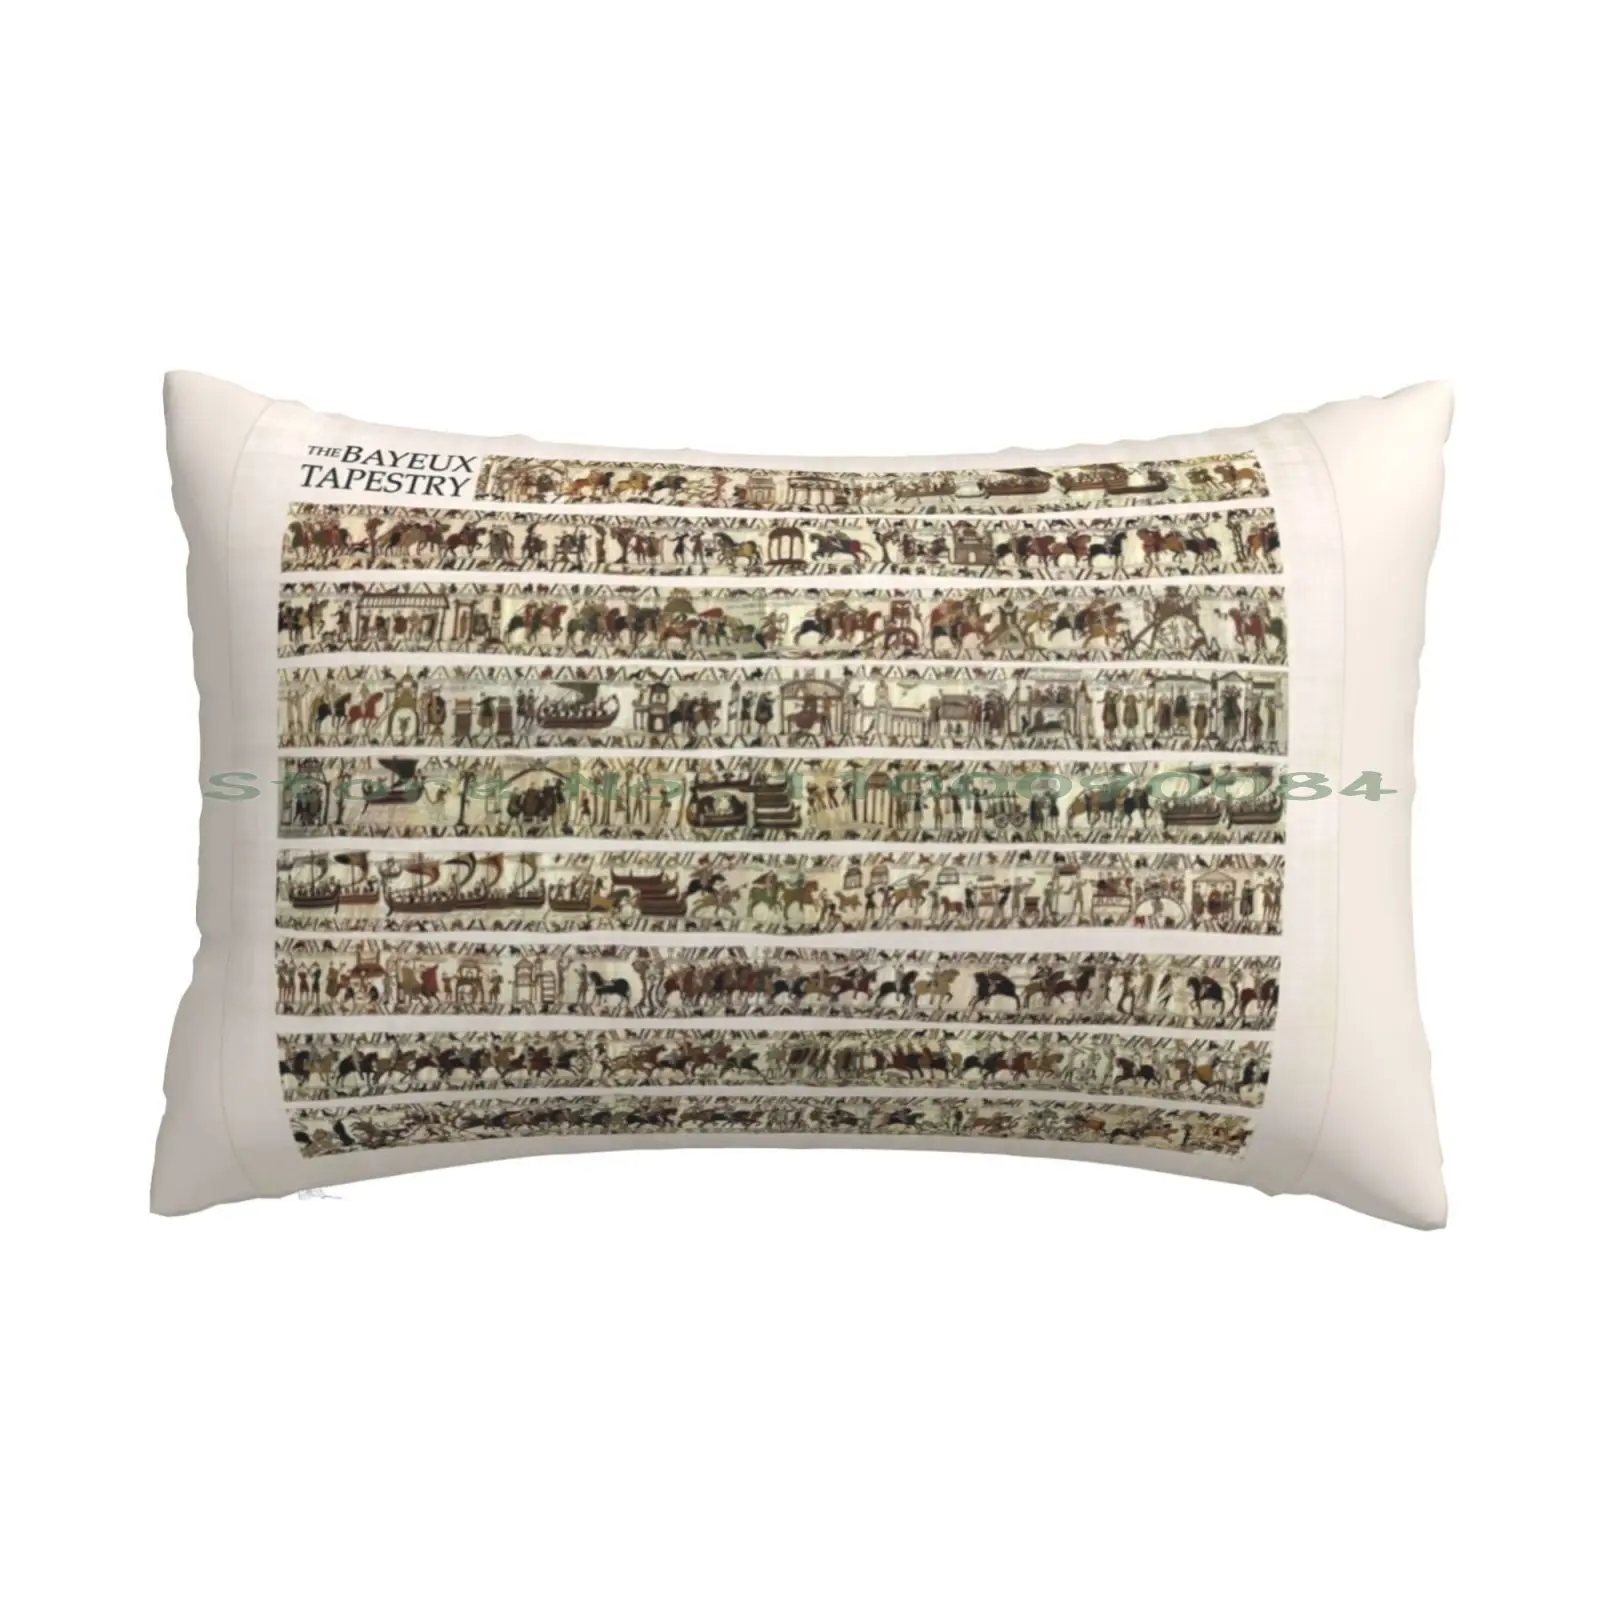 

The Complete Bayeux Tapestry Pillow Case 20x30 50*75 Sofa Bedroom Bayeux Battle Of Hastings 1066 Medieval Art Norman Anglo